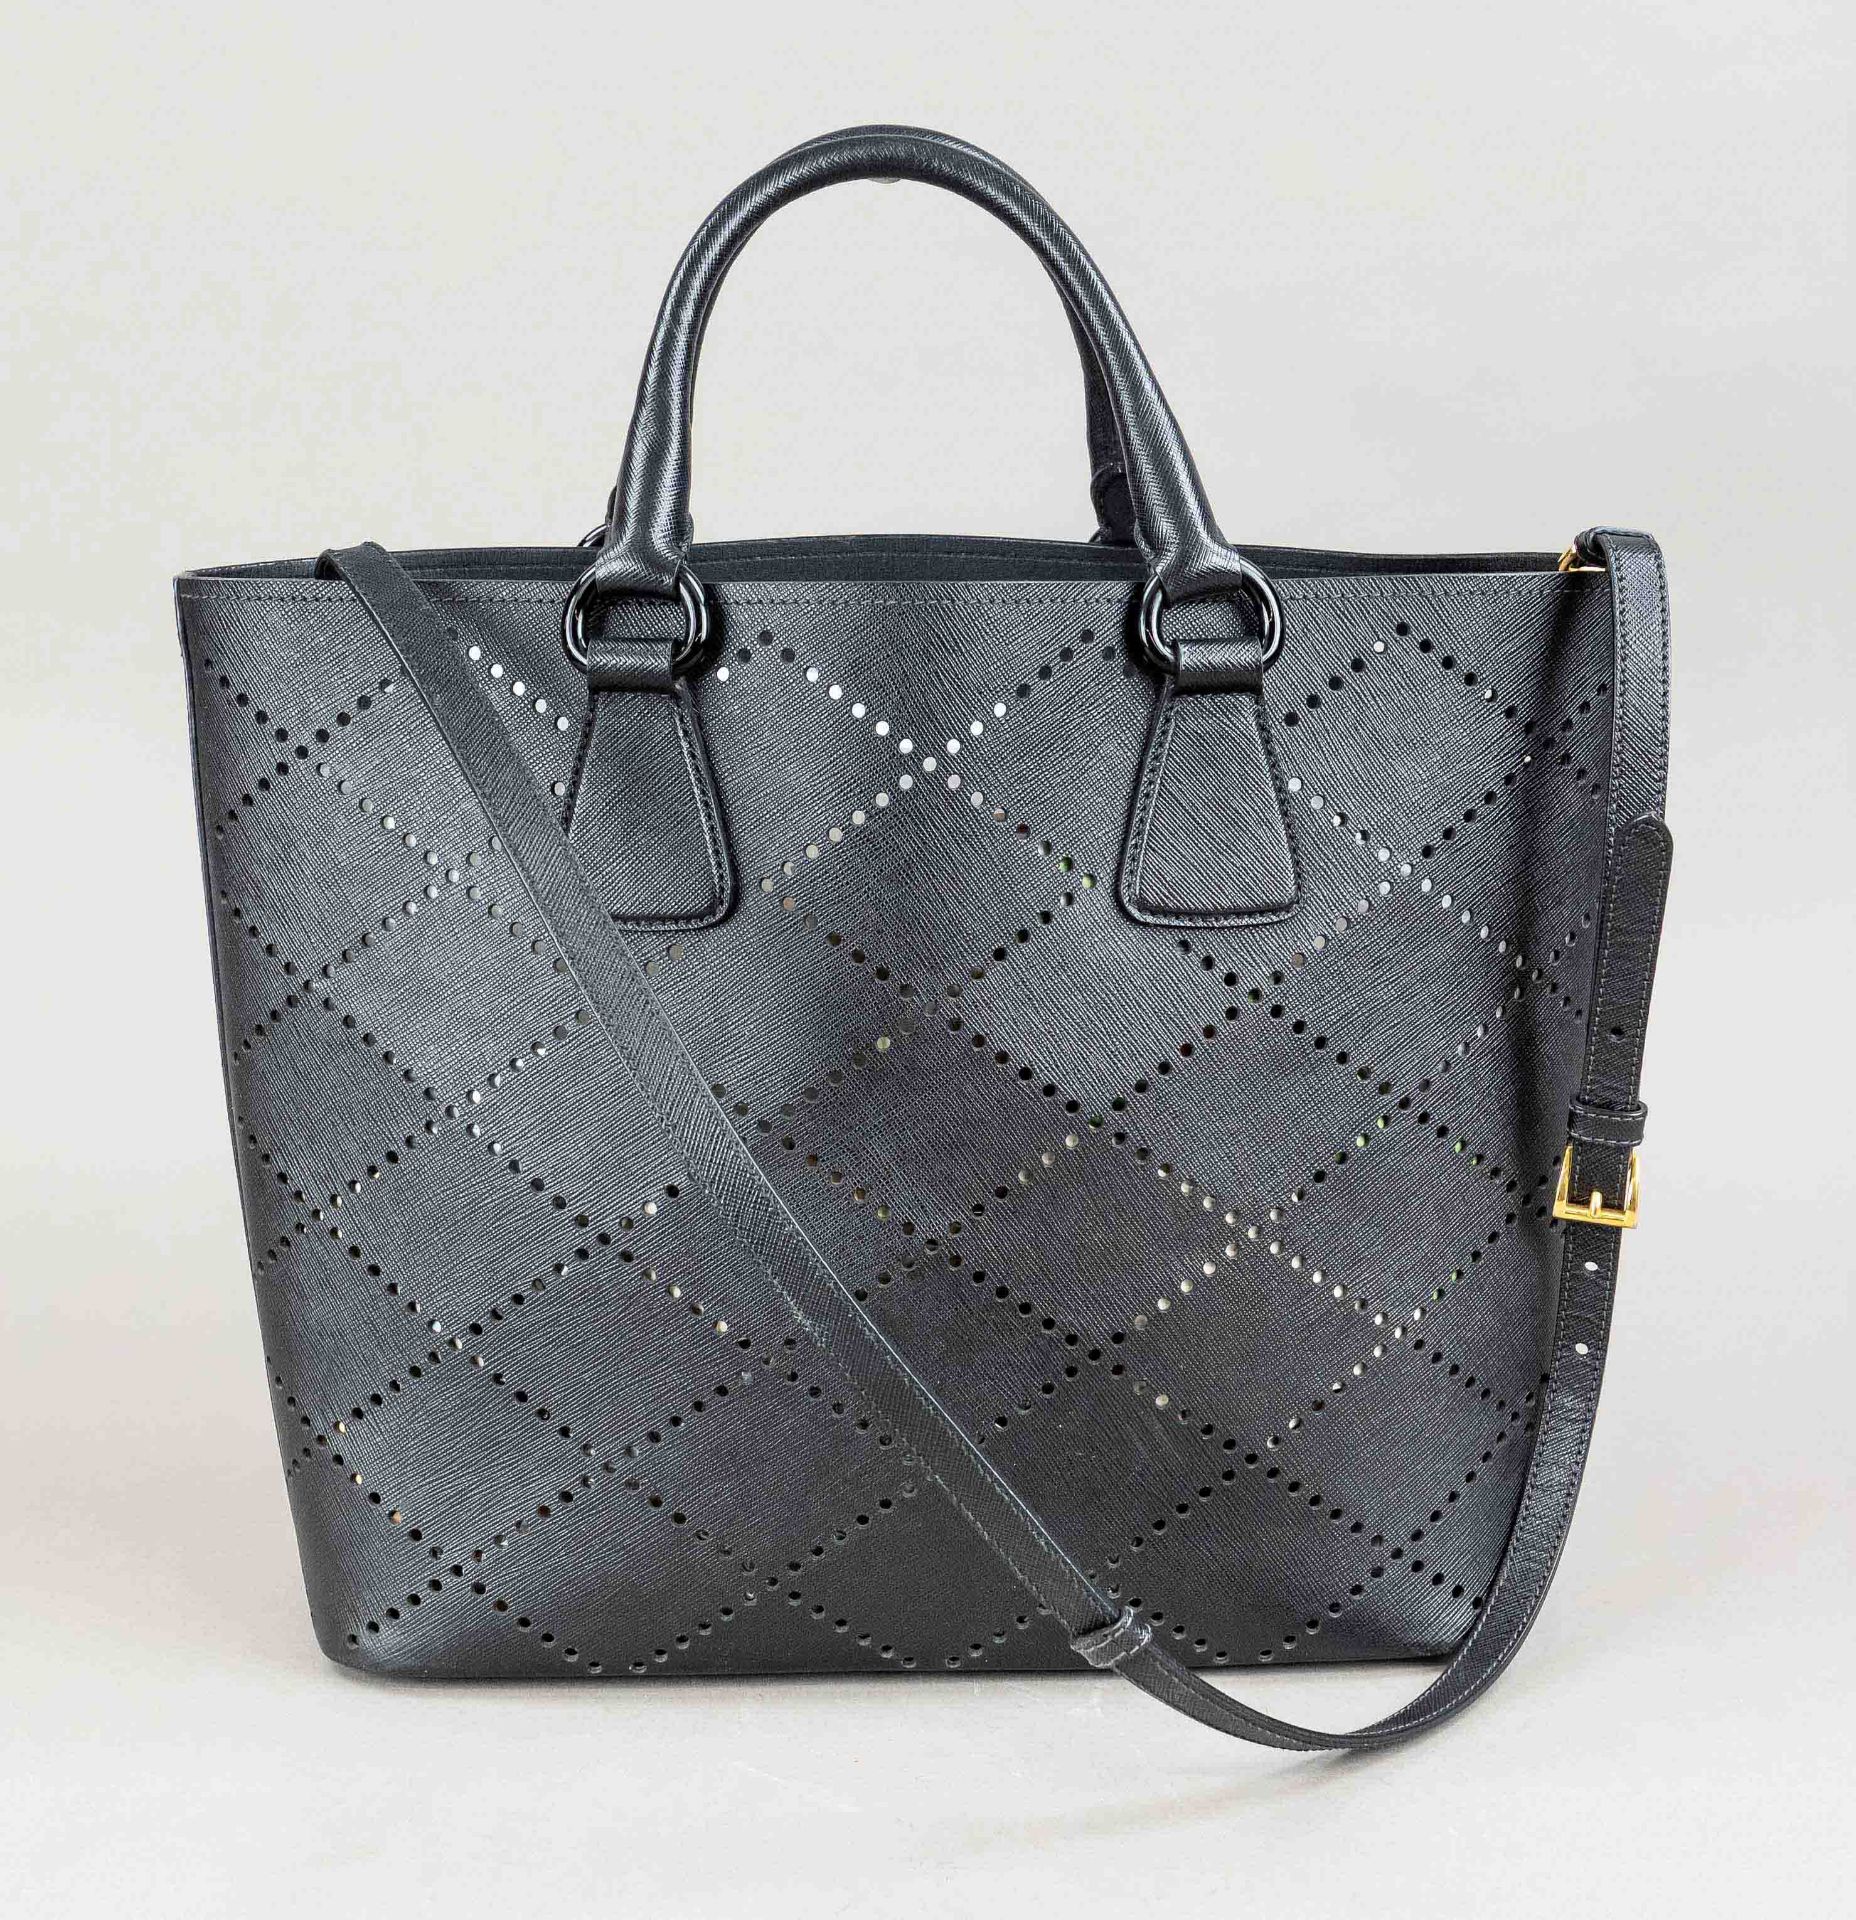 Prada, Black Saffiano Vernice Perforated Leather Oversize Shopping Tote Bag, black textured and